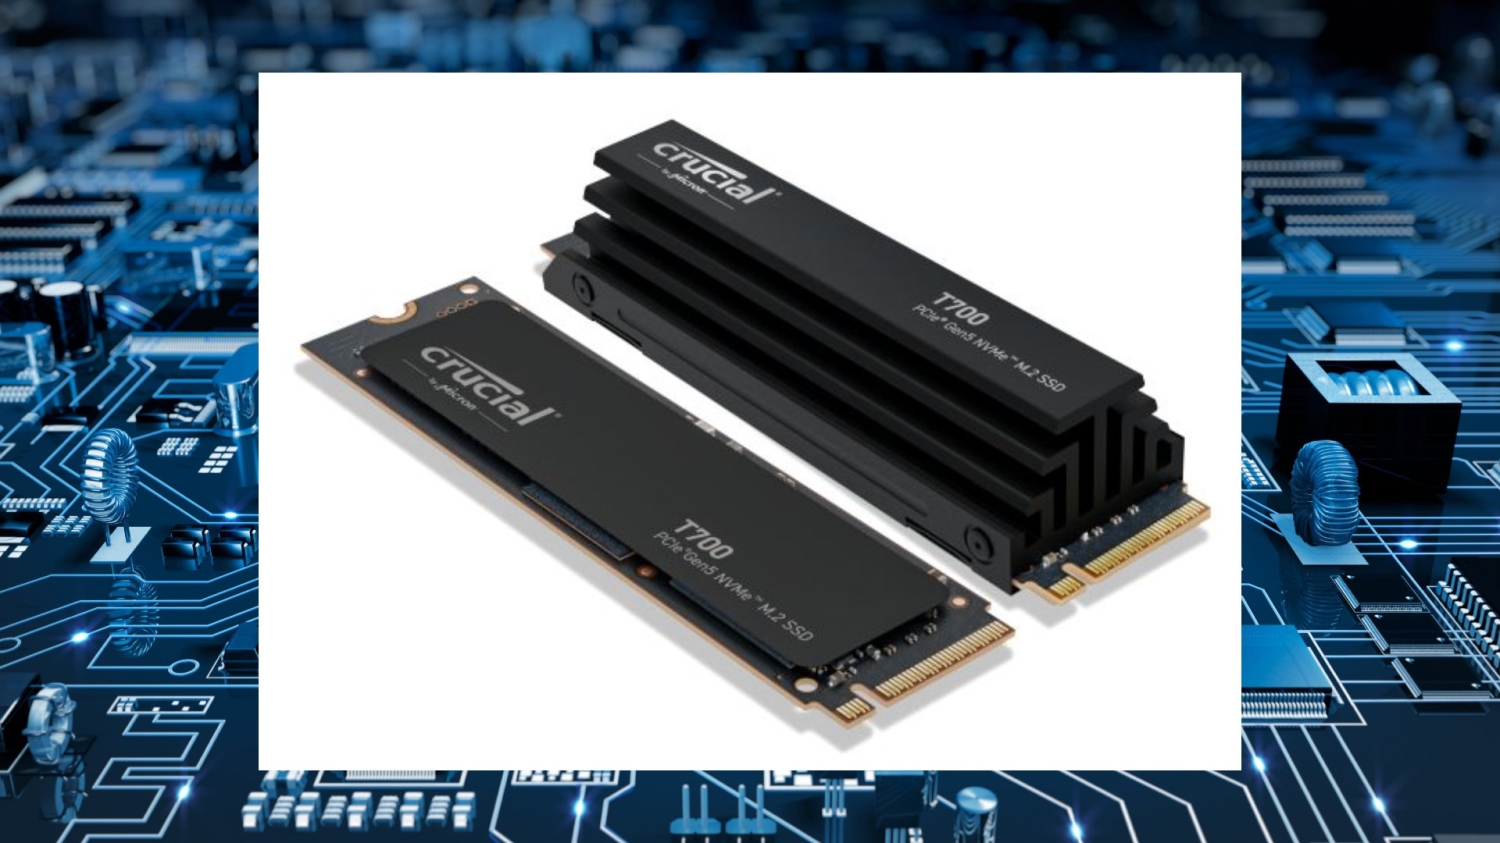 Crucial T700 PCIe 5.0 NVMe SSD Review - 12GB/s (Page 4)